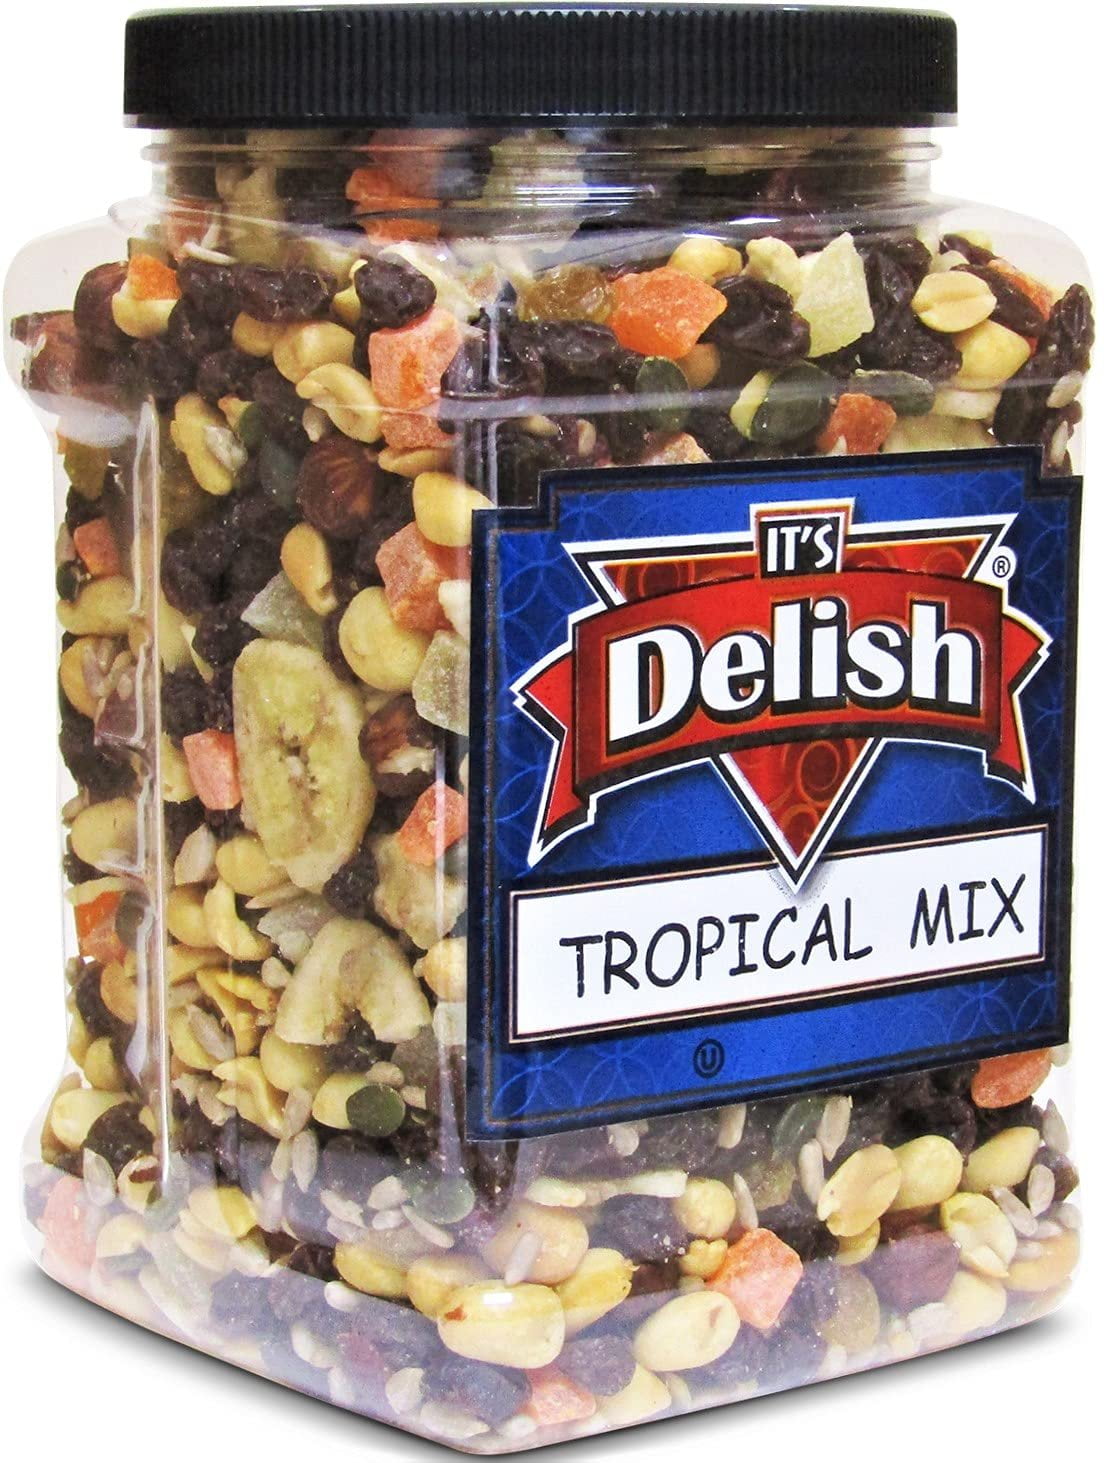 Tropical Mix Fruit and Nuts Trail Mix by Its Delish Bulk 2.5 lbs Jumbo ...